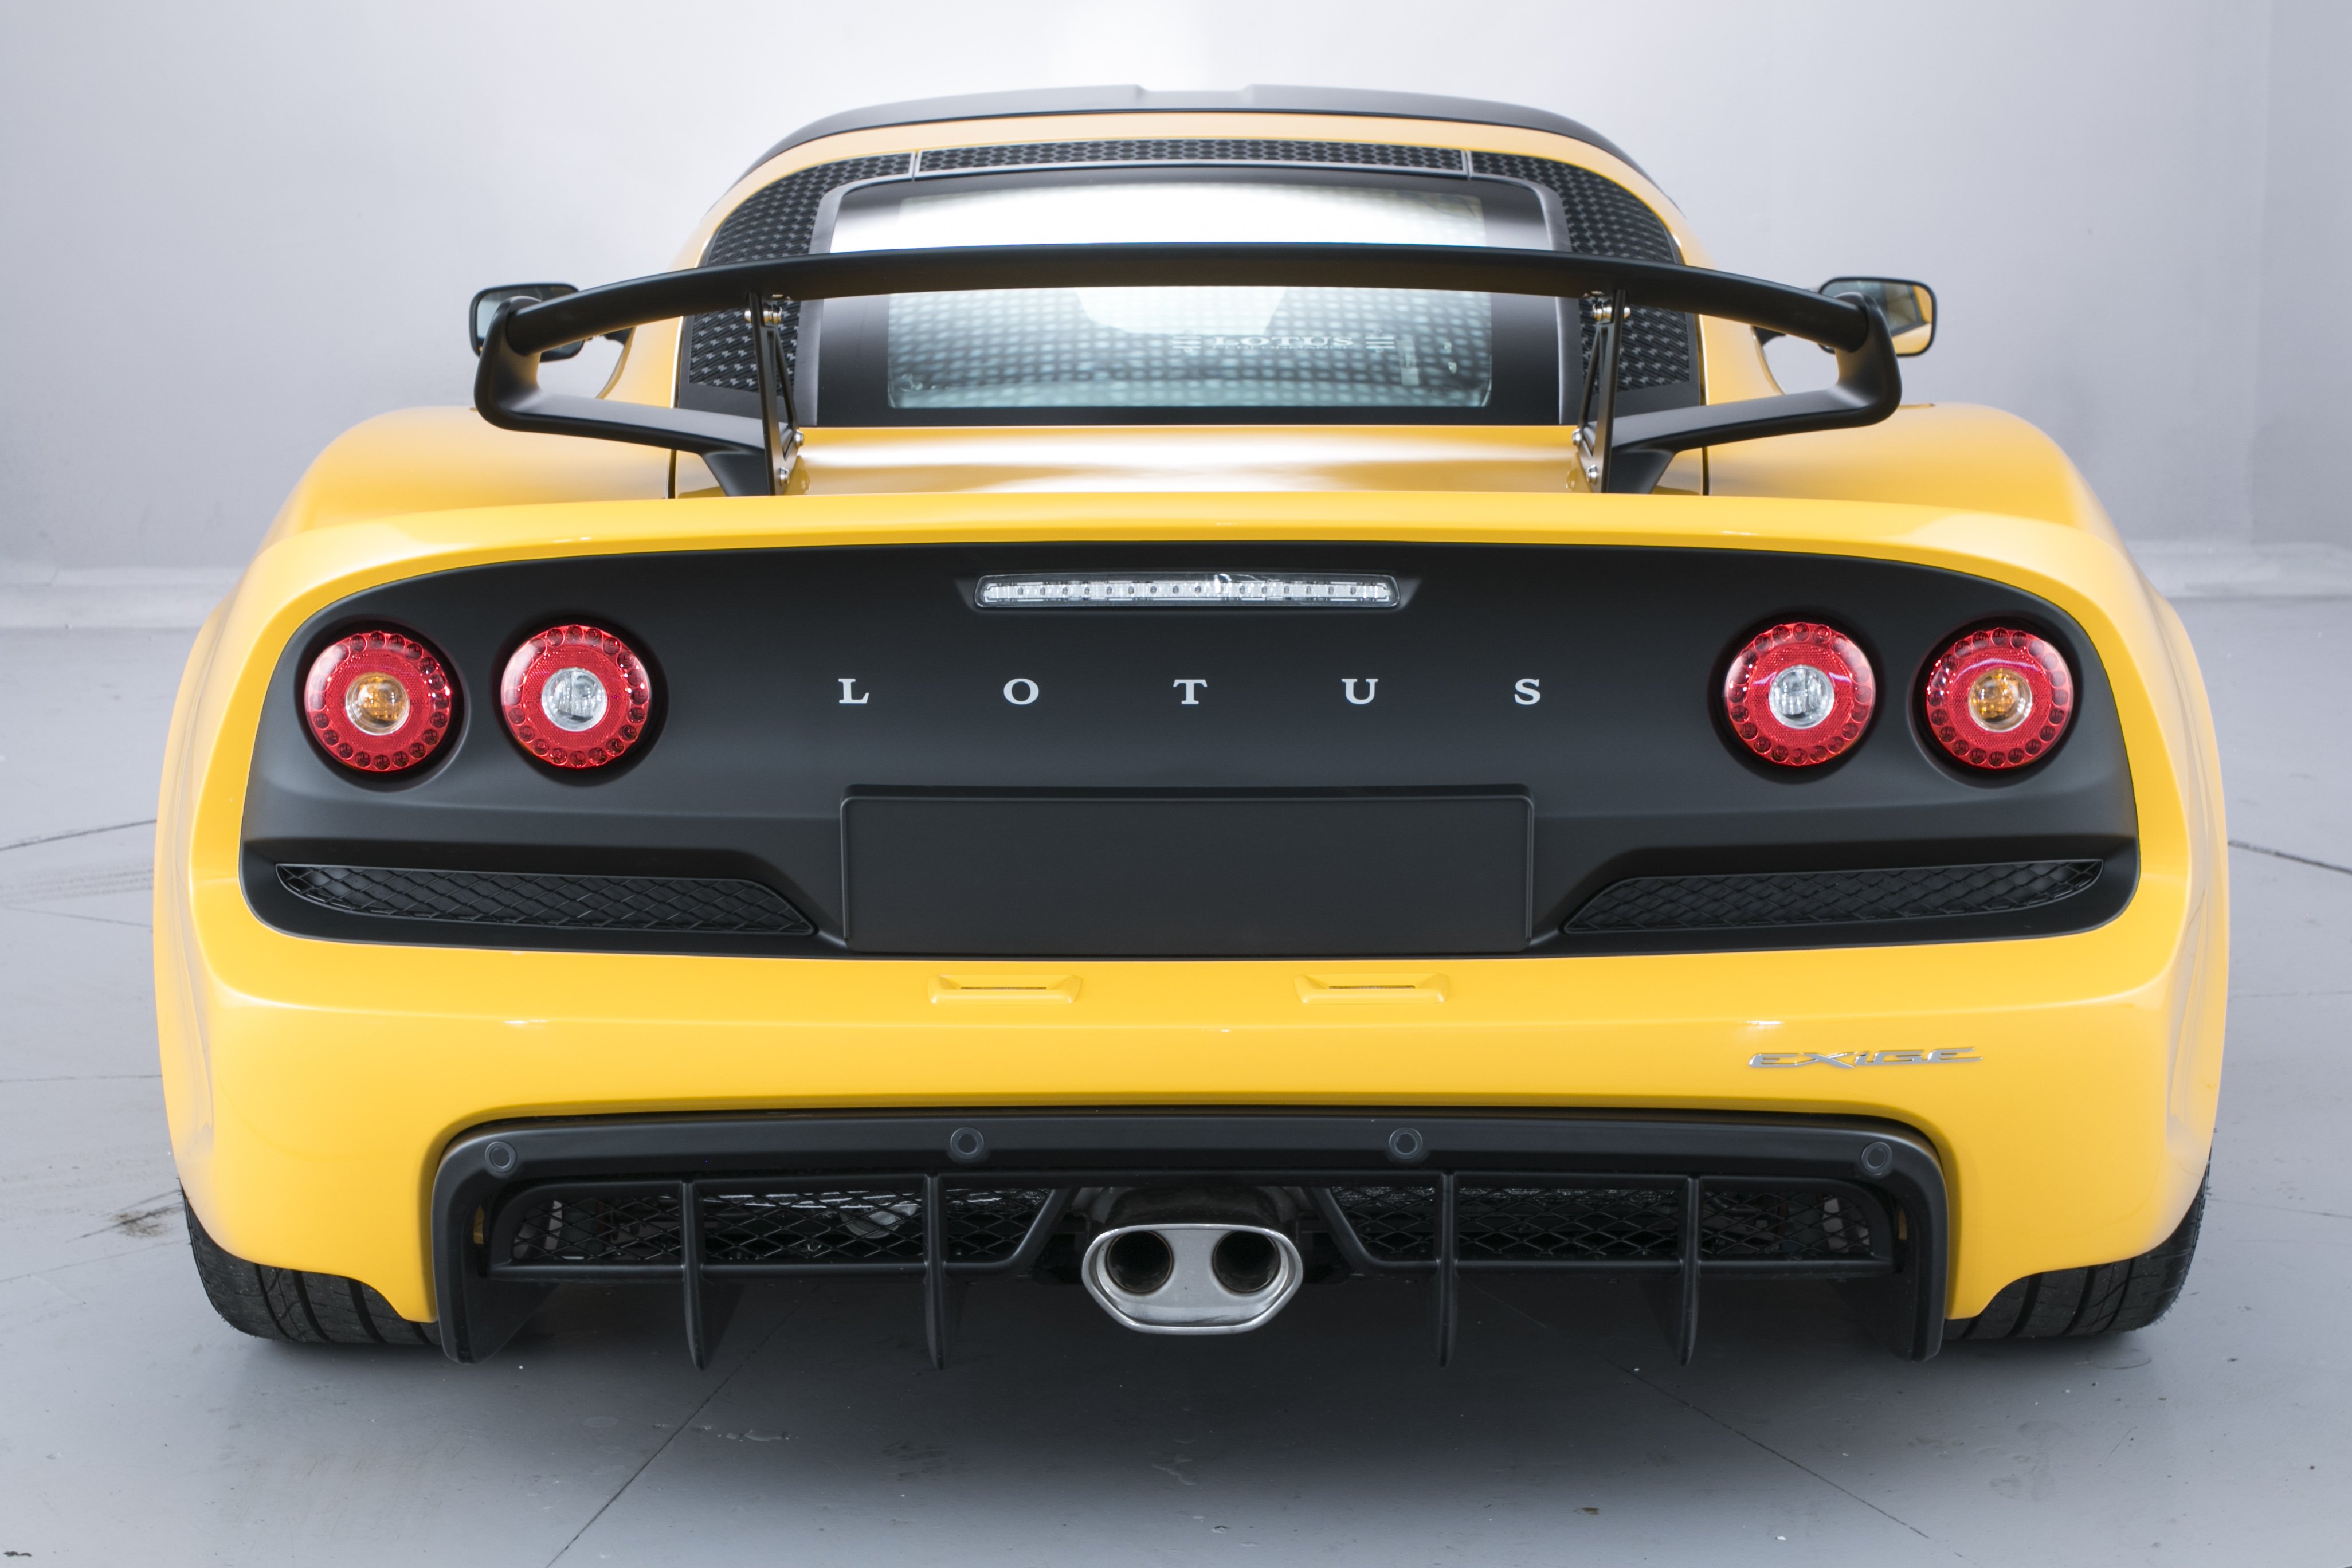 2015, Lotus, Exige s, Coupe, Club, Racer, Cars Wallpaper